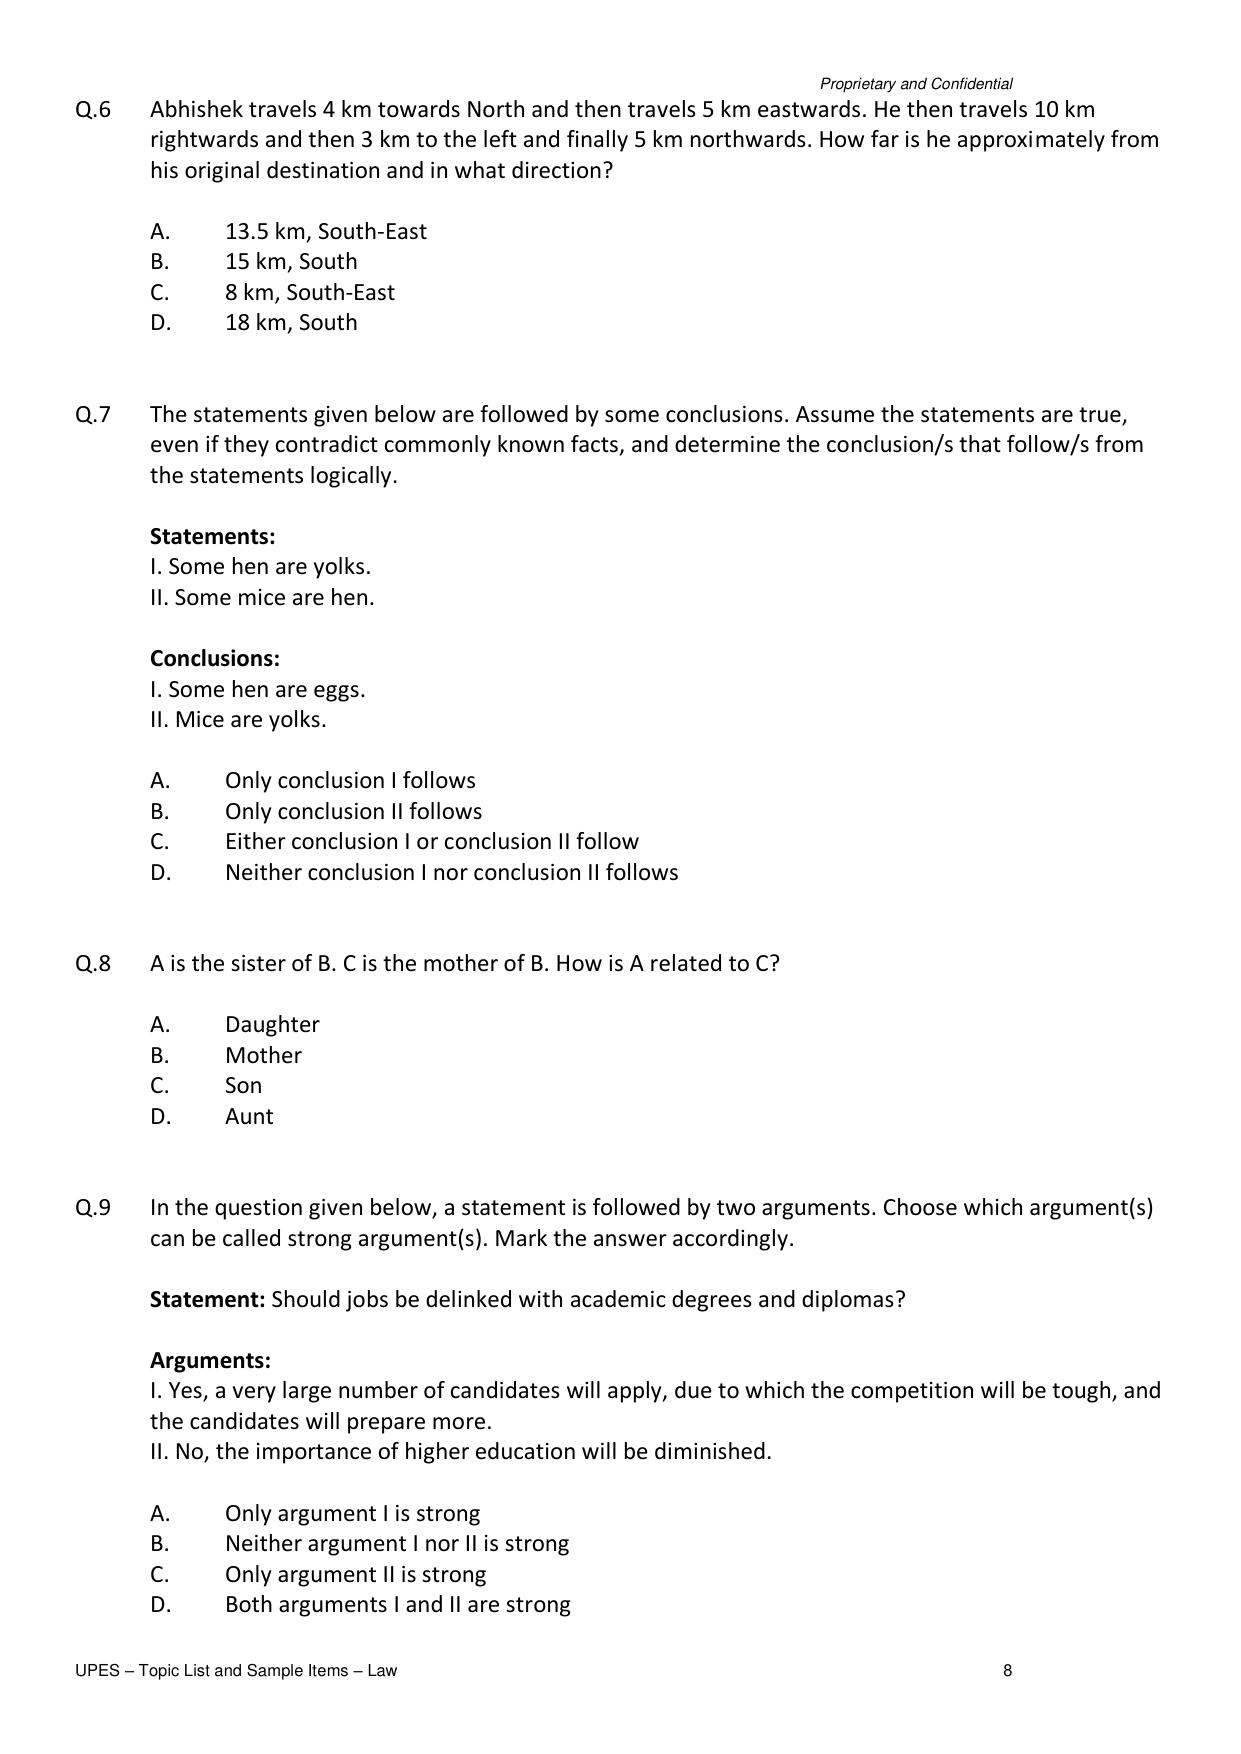 UPES Law Sample Papers - Page 8